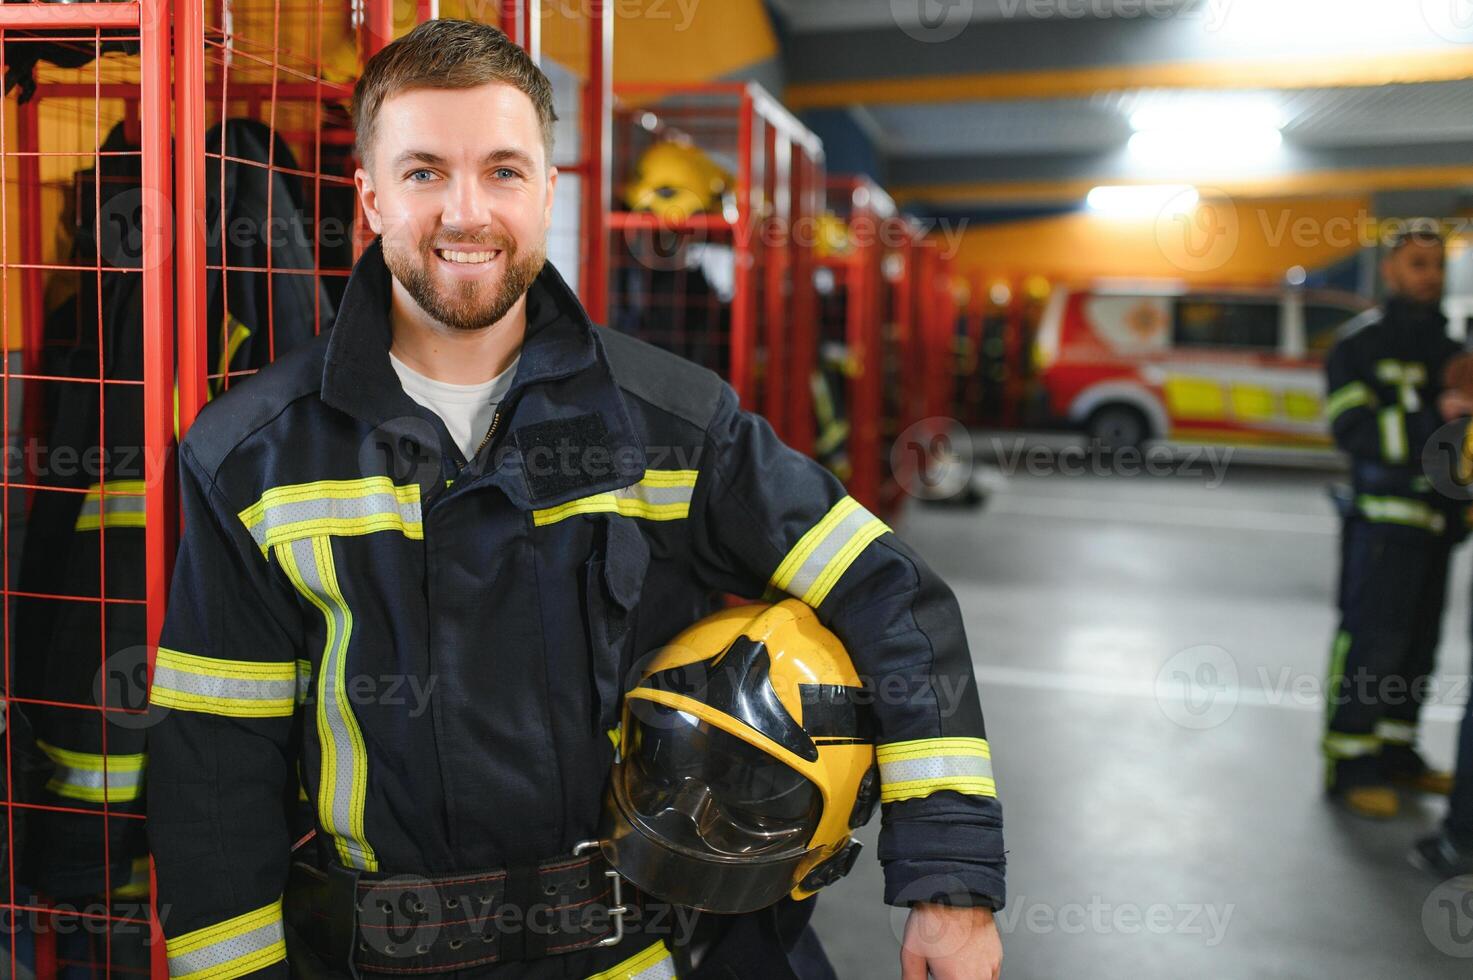 Fireman wearing protective uniform standing in fire department at fire station photo